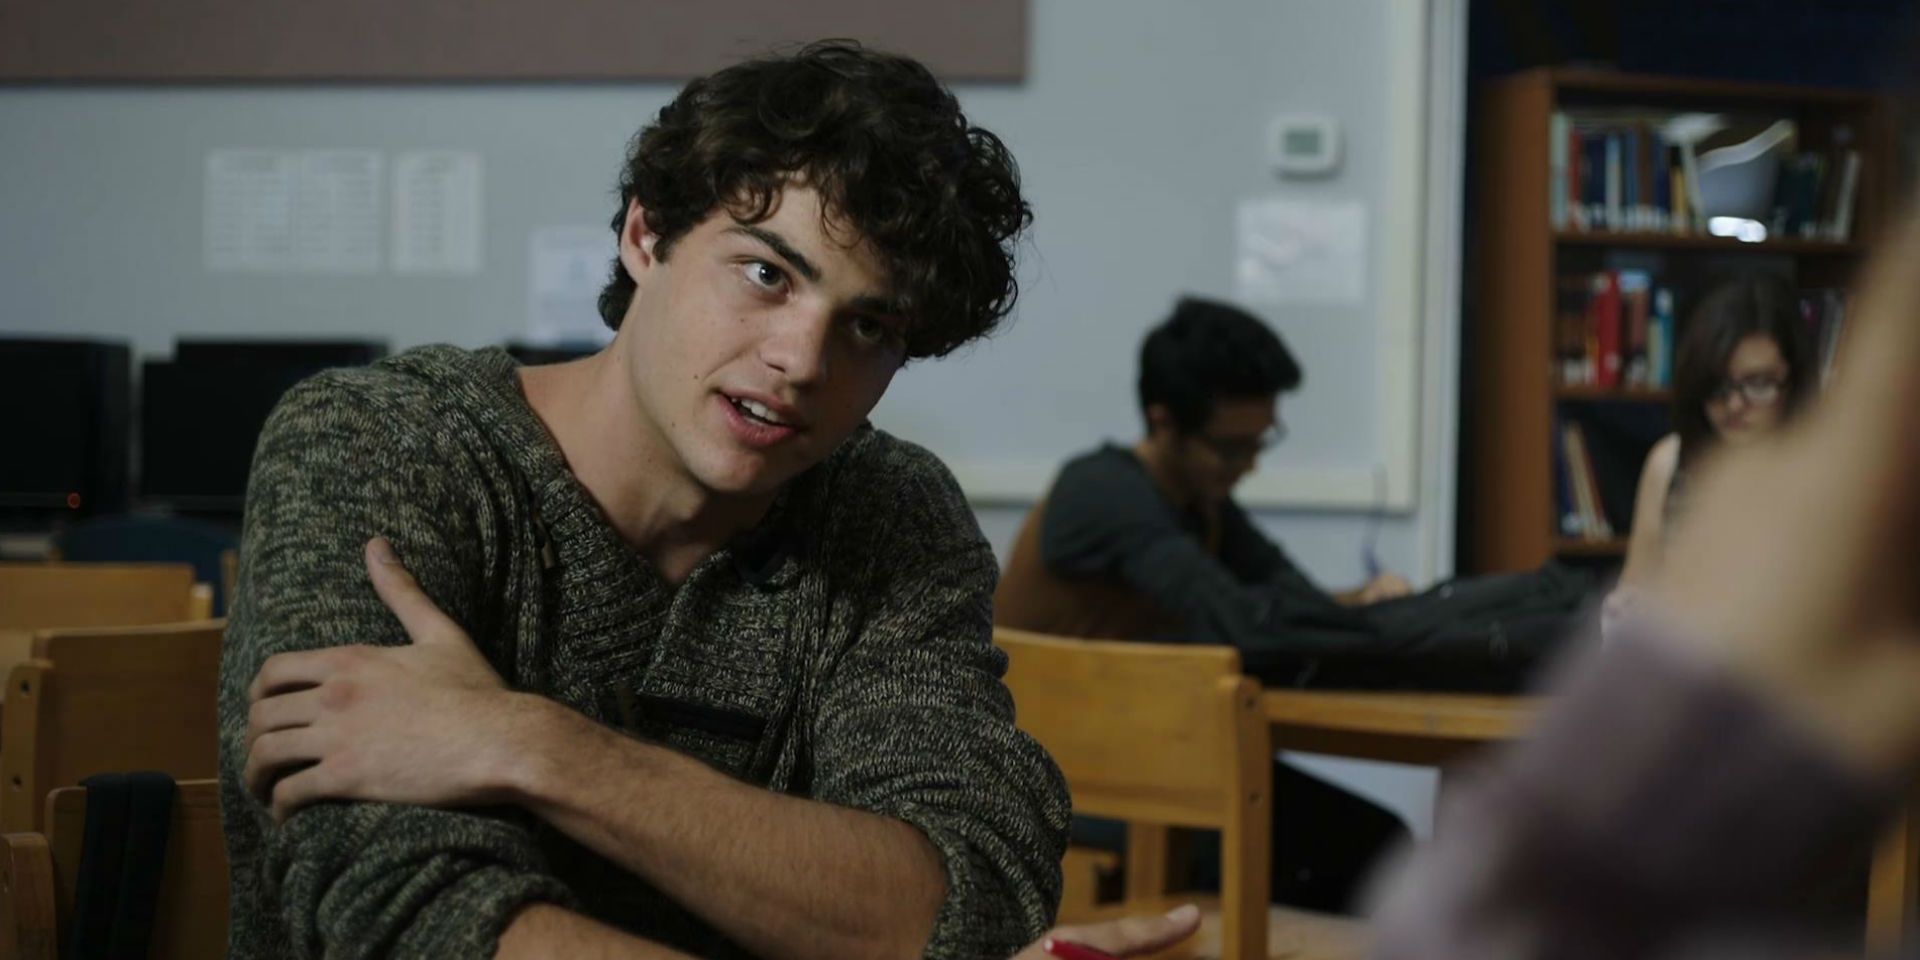 Noah Centineo tries to convince everyone he is innocent in T@Gged